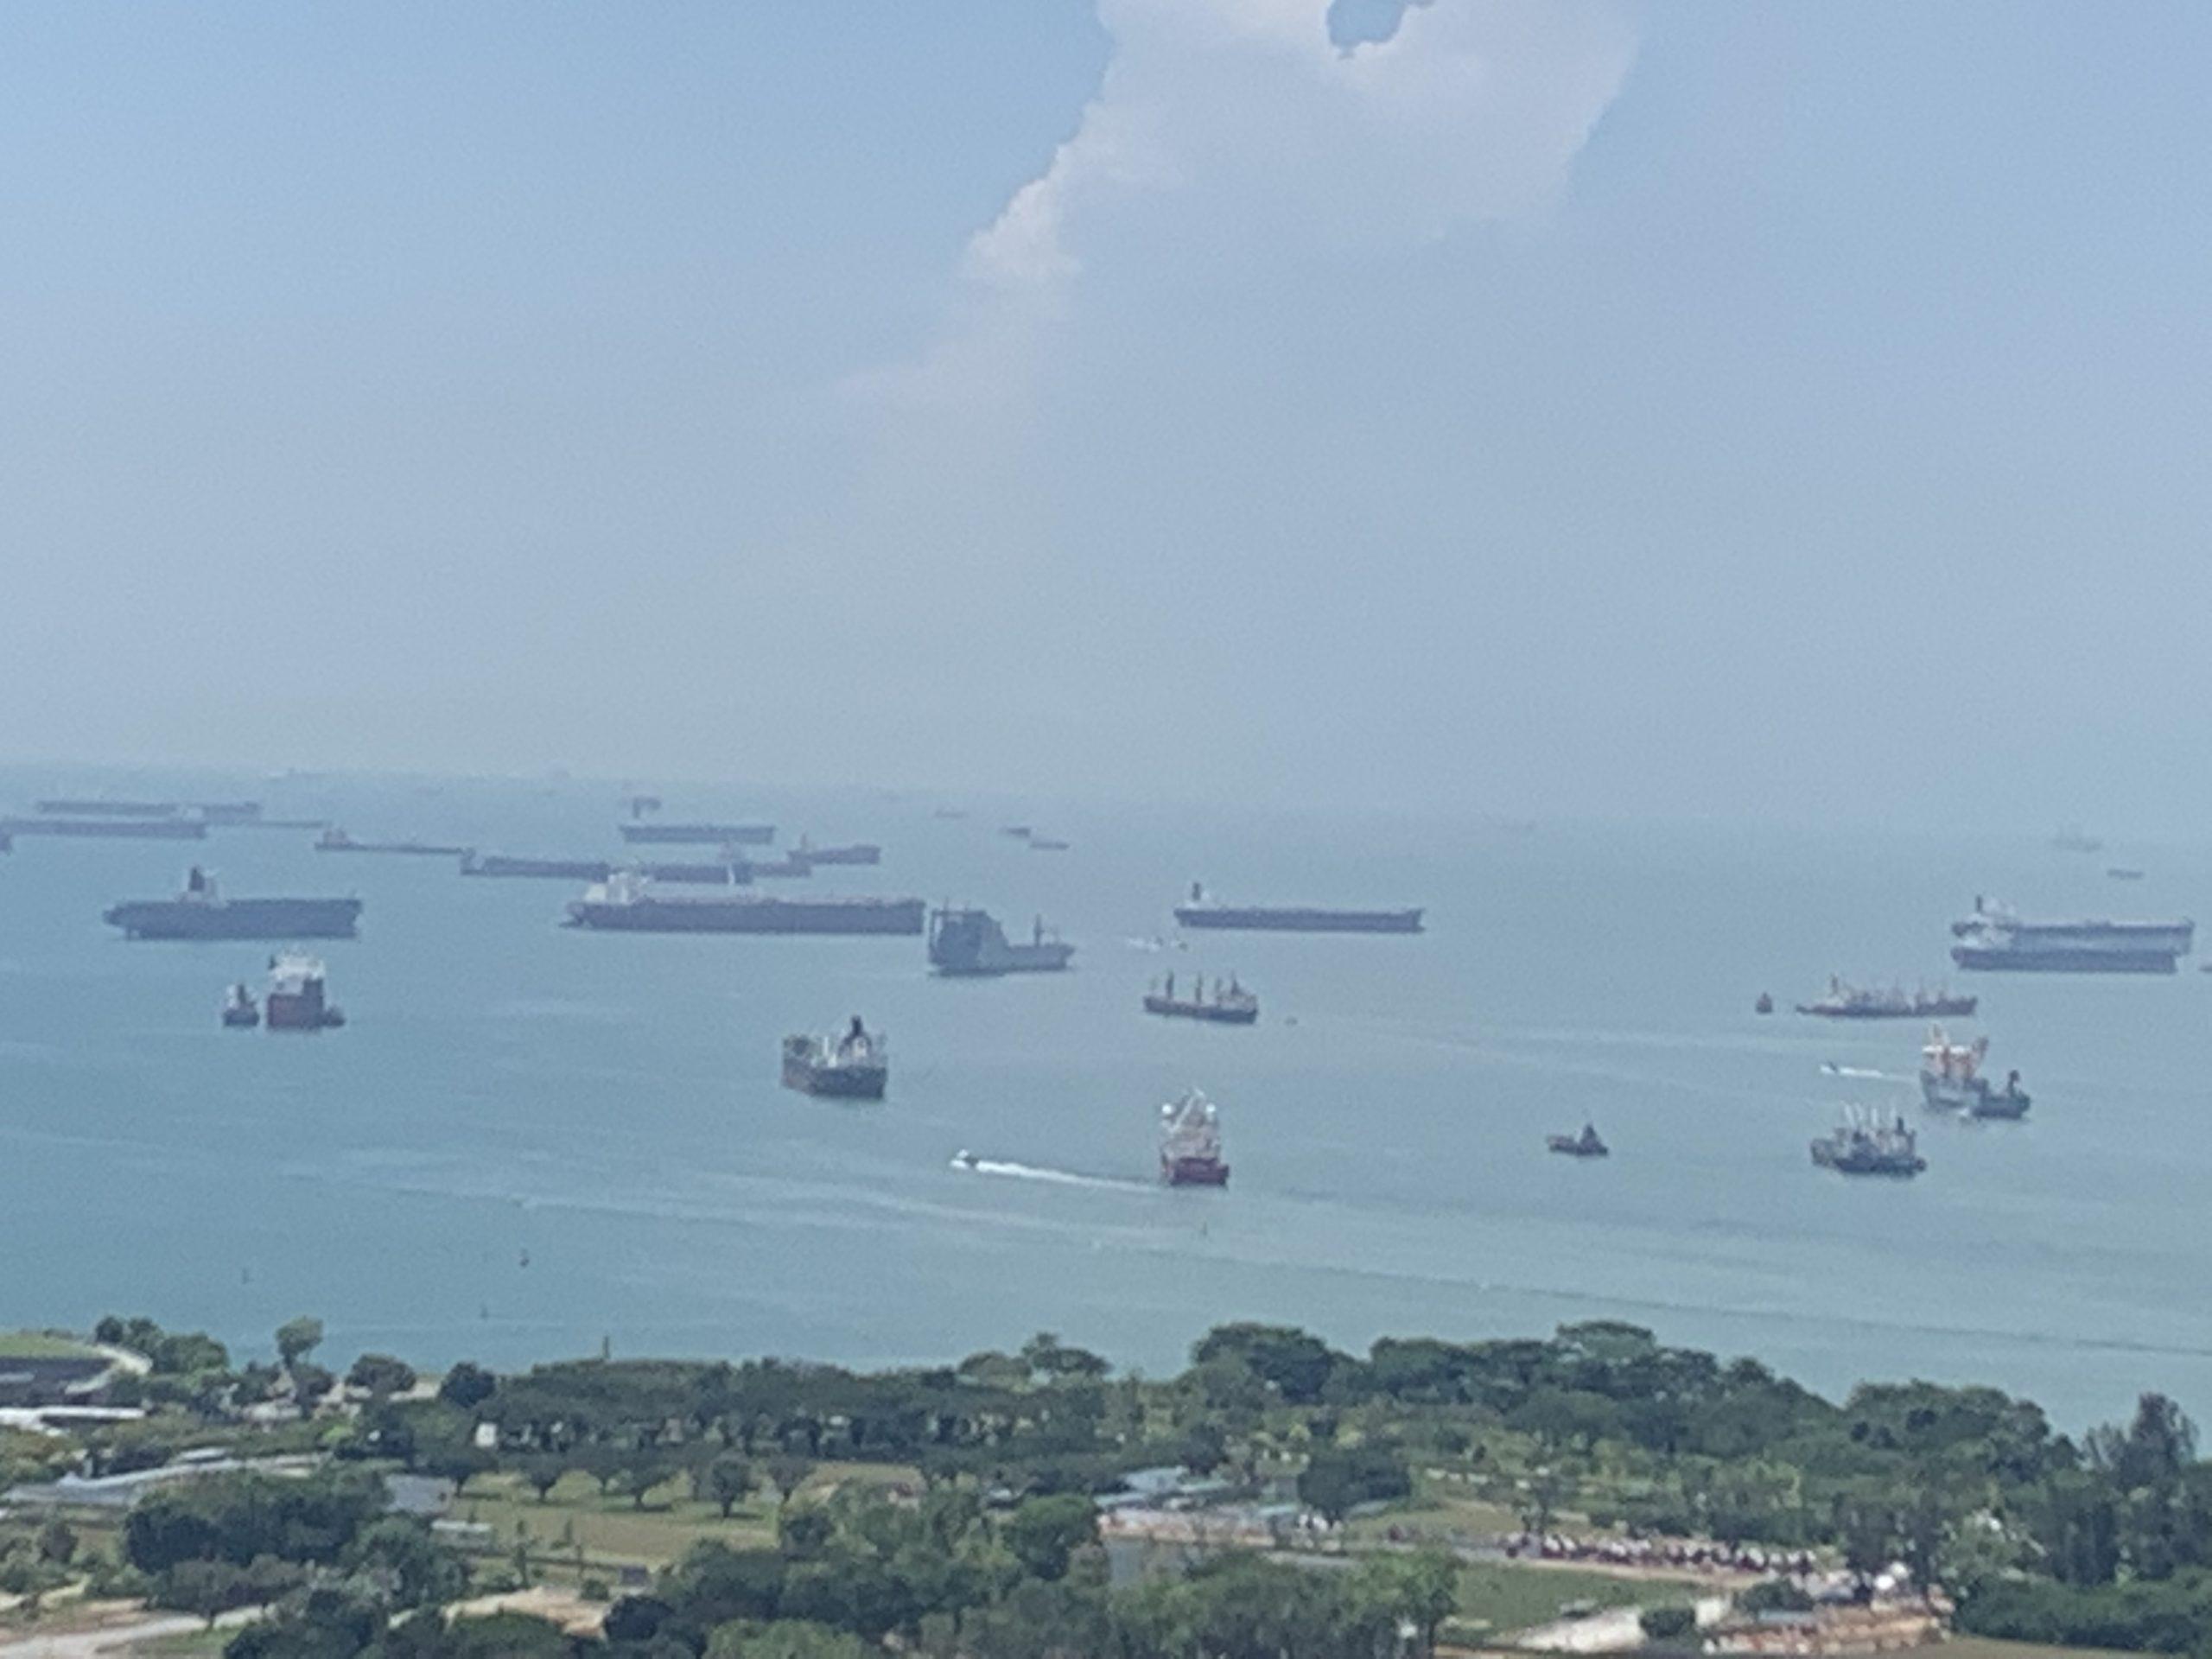 Ships in the harbour off Singapore